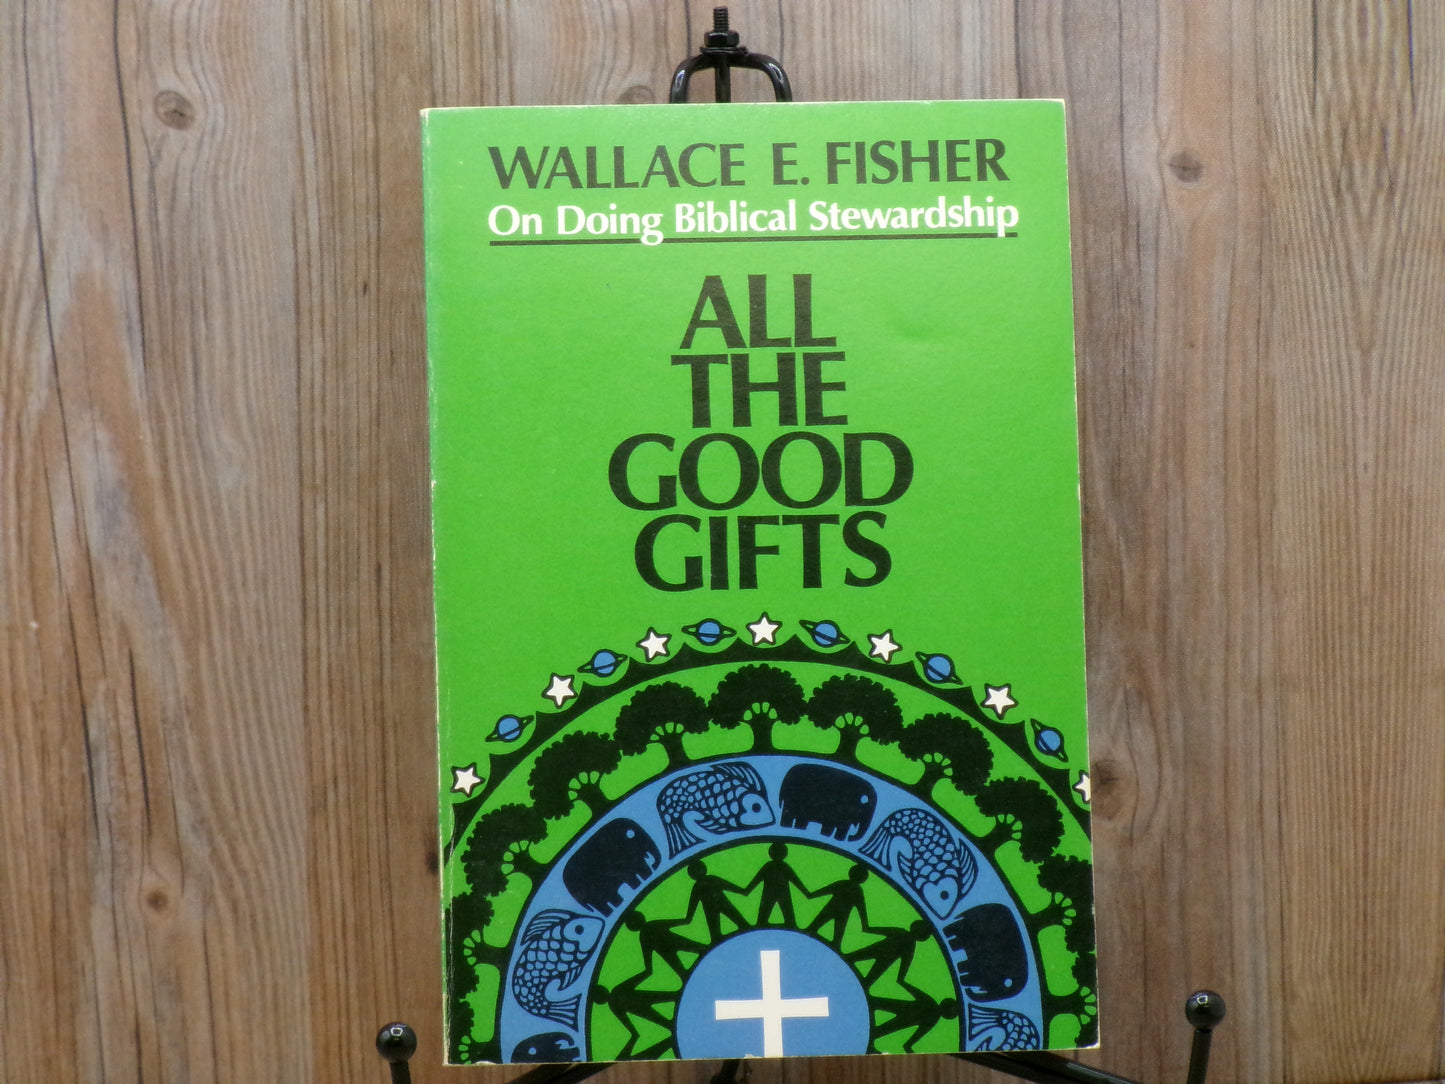 All the Good Gifts by Wallace E. Fisher